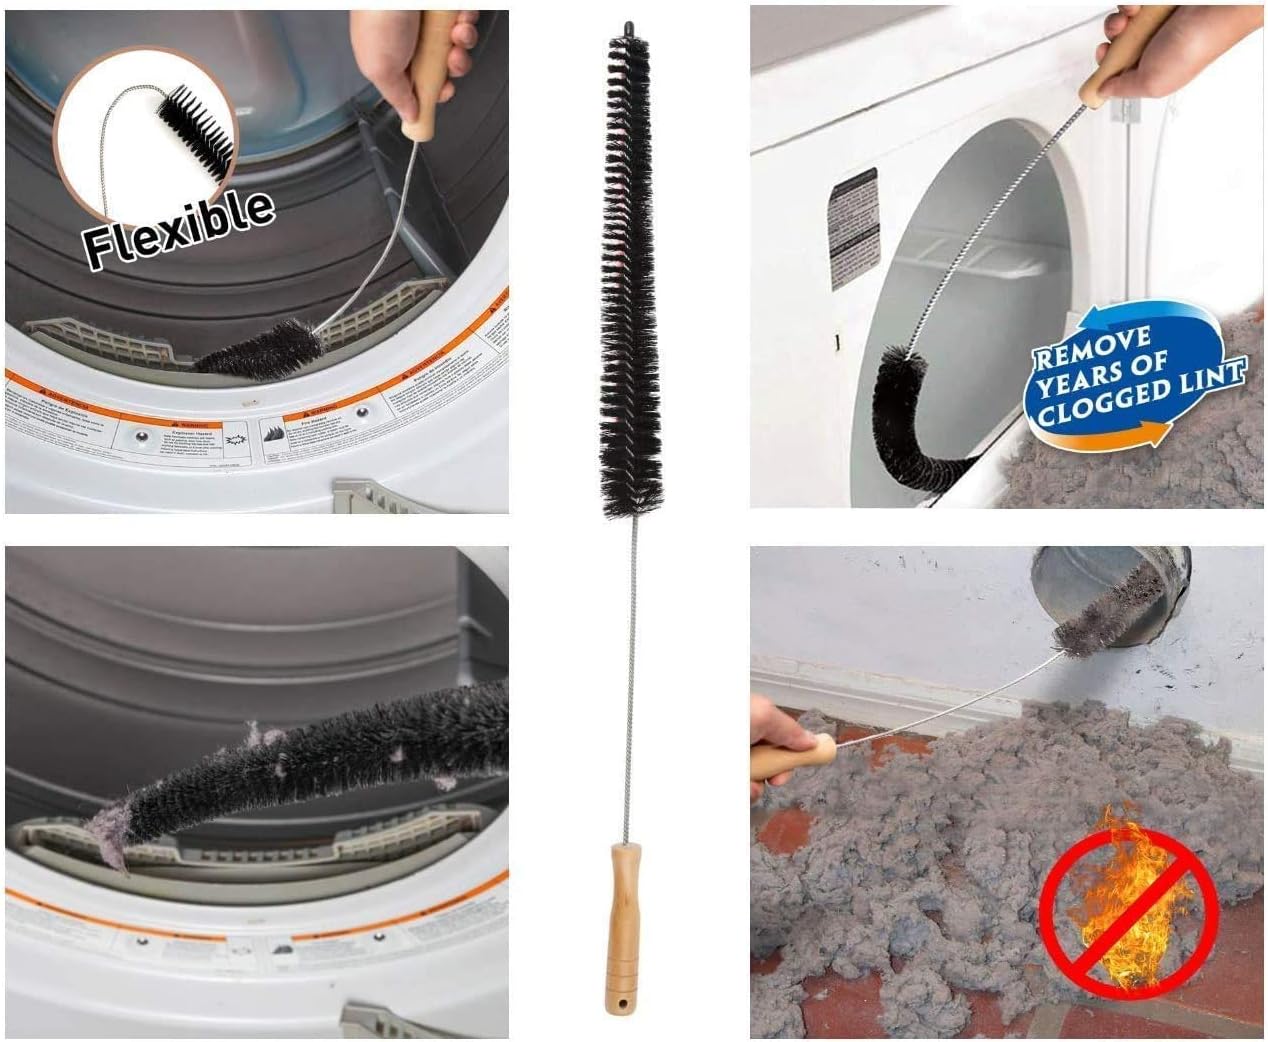 Dryer Vent Cleaning Brush Vent Trap Cleaner Flexible Refrigerator